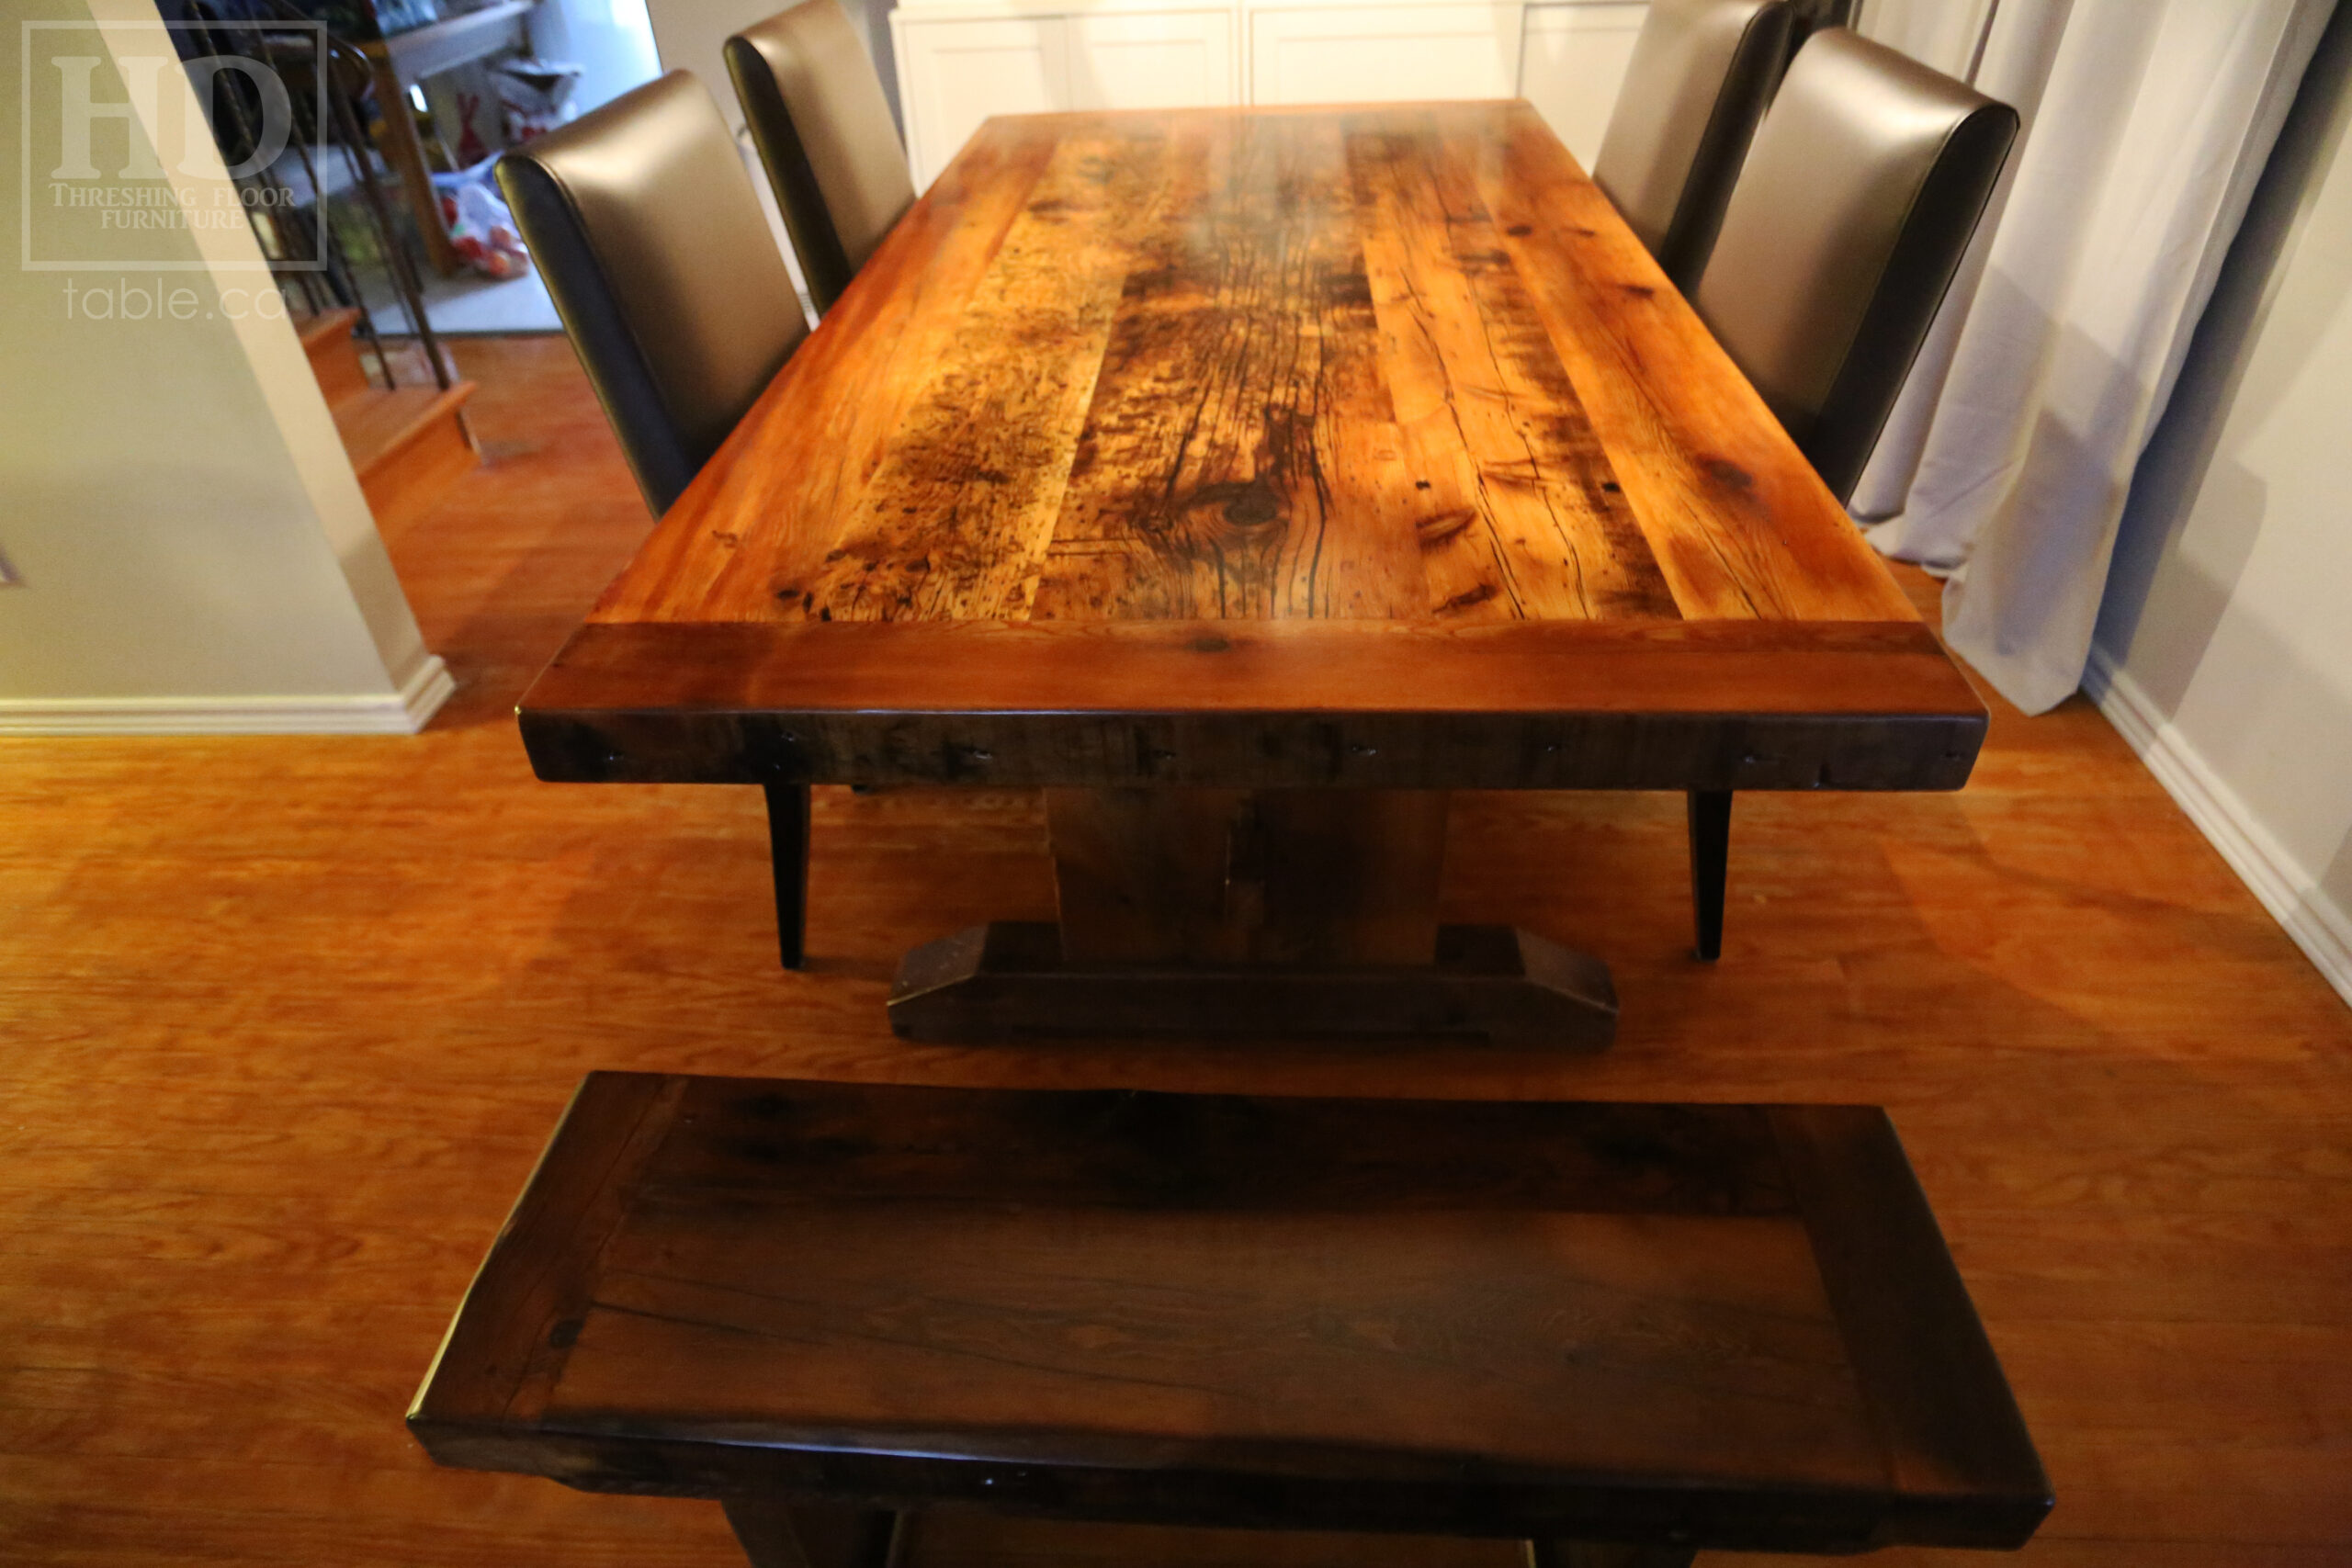 7' Ontario Barnwood Table - 42" wide - Trestle Base - Reclaimed Hemlock Threshing Floor Construction - Original edges & distressing maintained - Premium epoxy + satin polyurethane finish - 3" Joist Material Top Option - [2] Matching 42" Trestle Benches - [4] Topgrain Leather Parsons Chairs / Brimstone - www.table.ca